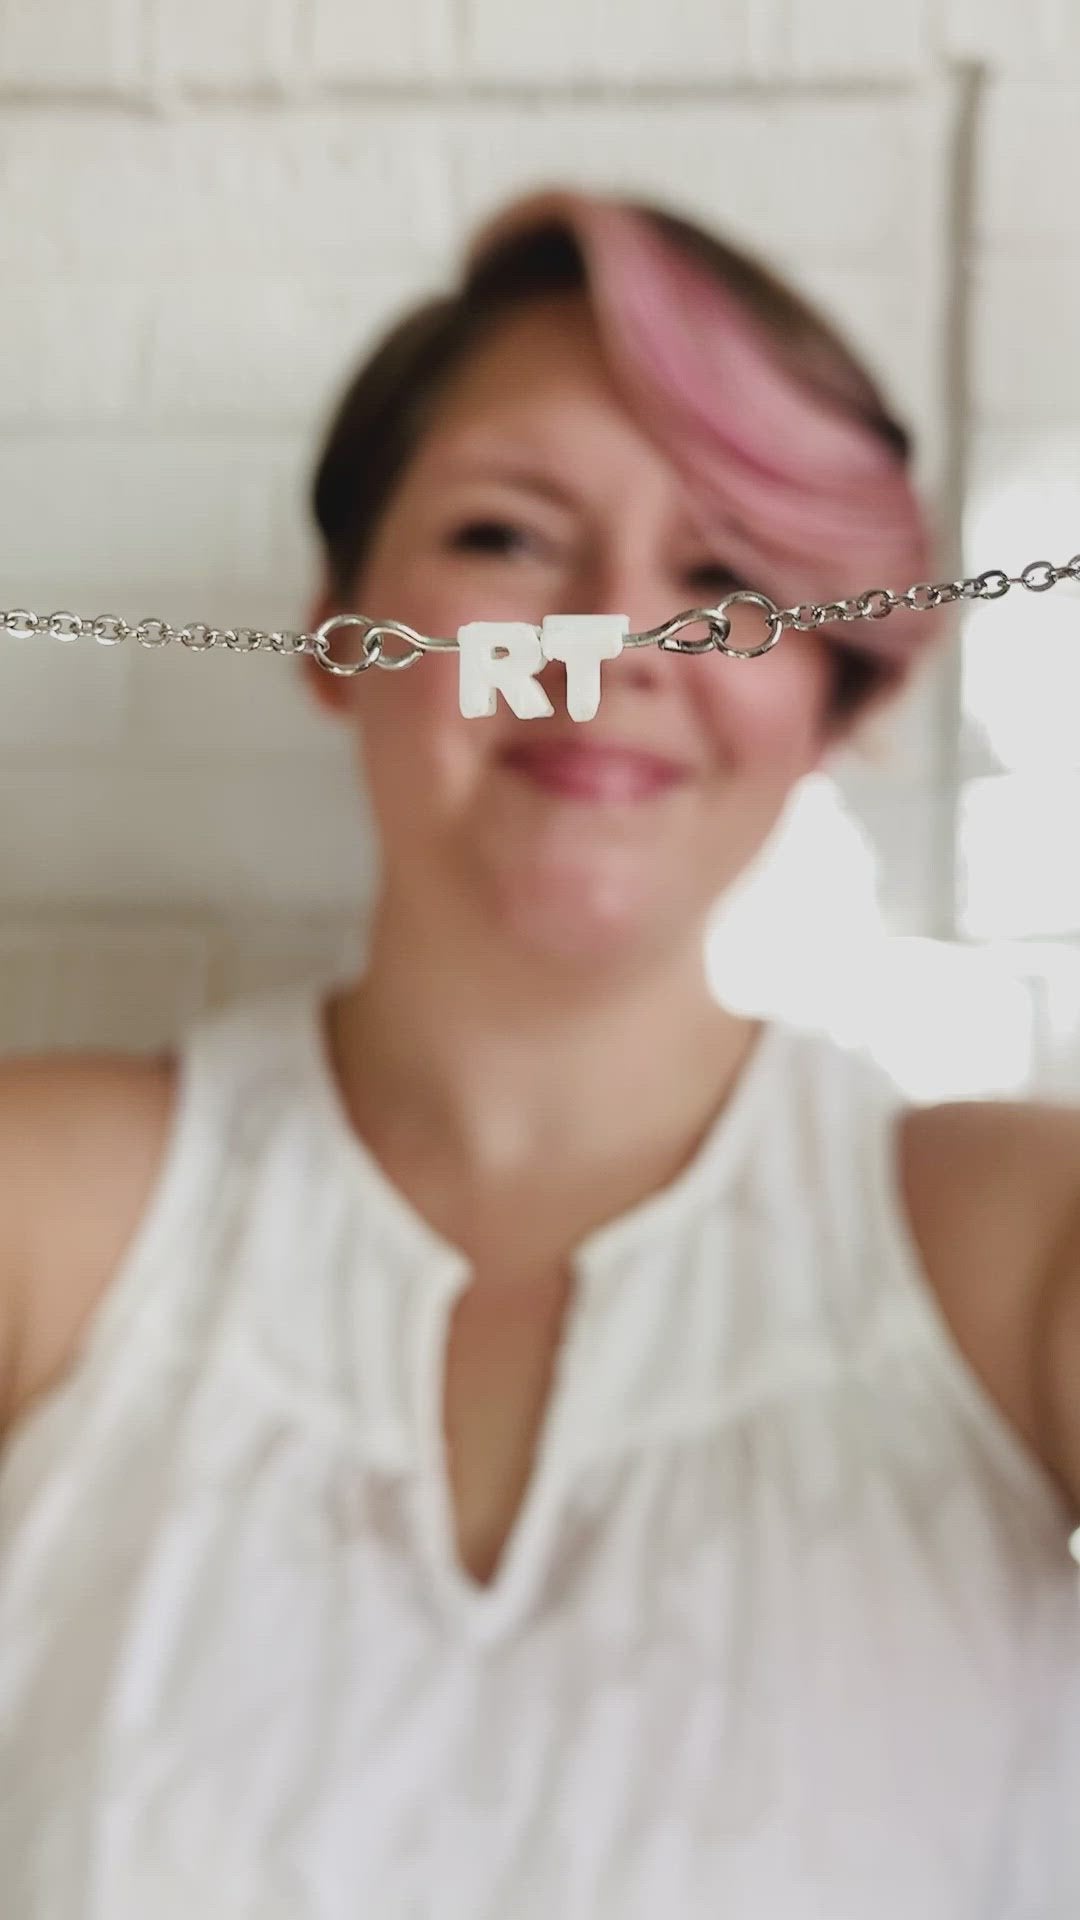 The video starts with Rebekah Thornhill, owner of R+D holding a necklace up to the camera. It has small letters on a metal bar. The letters are like beads and will rotate and move around. This necklace has 2 characters (RT) in a white. In the video she puts the necklace on to show how it looks when being worn.  